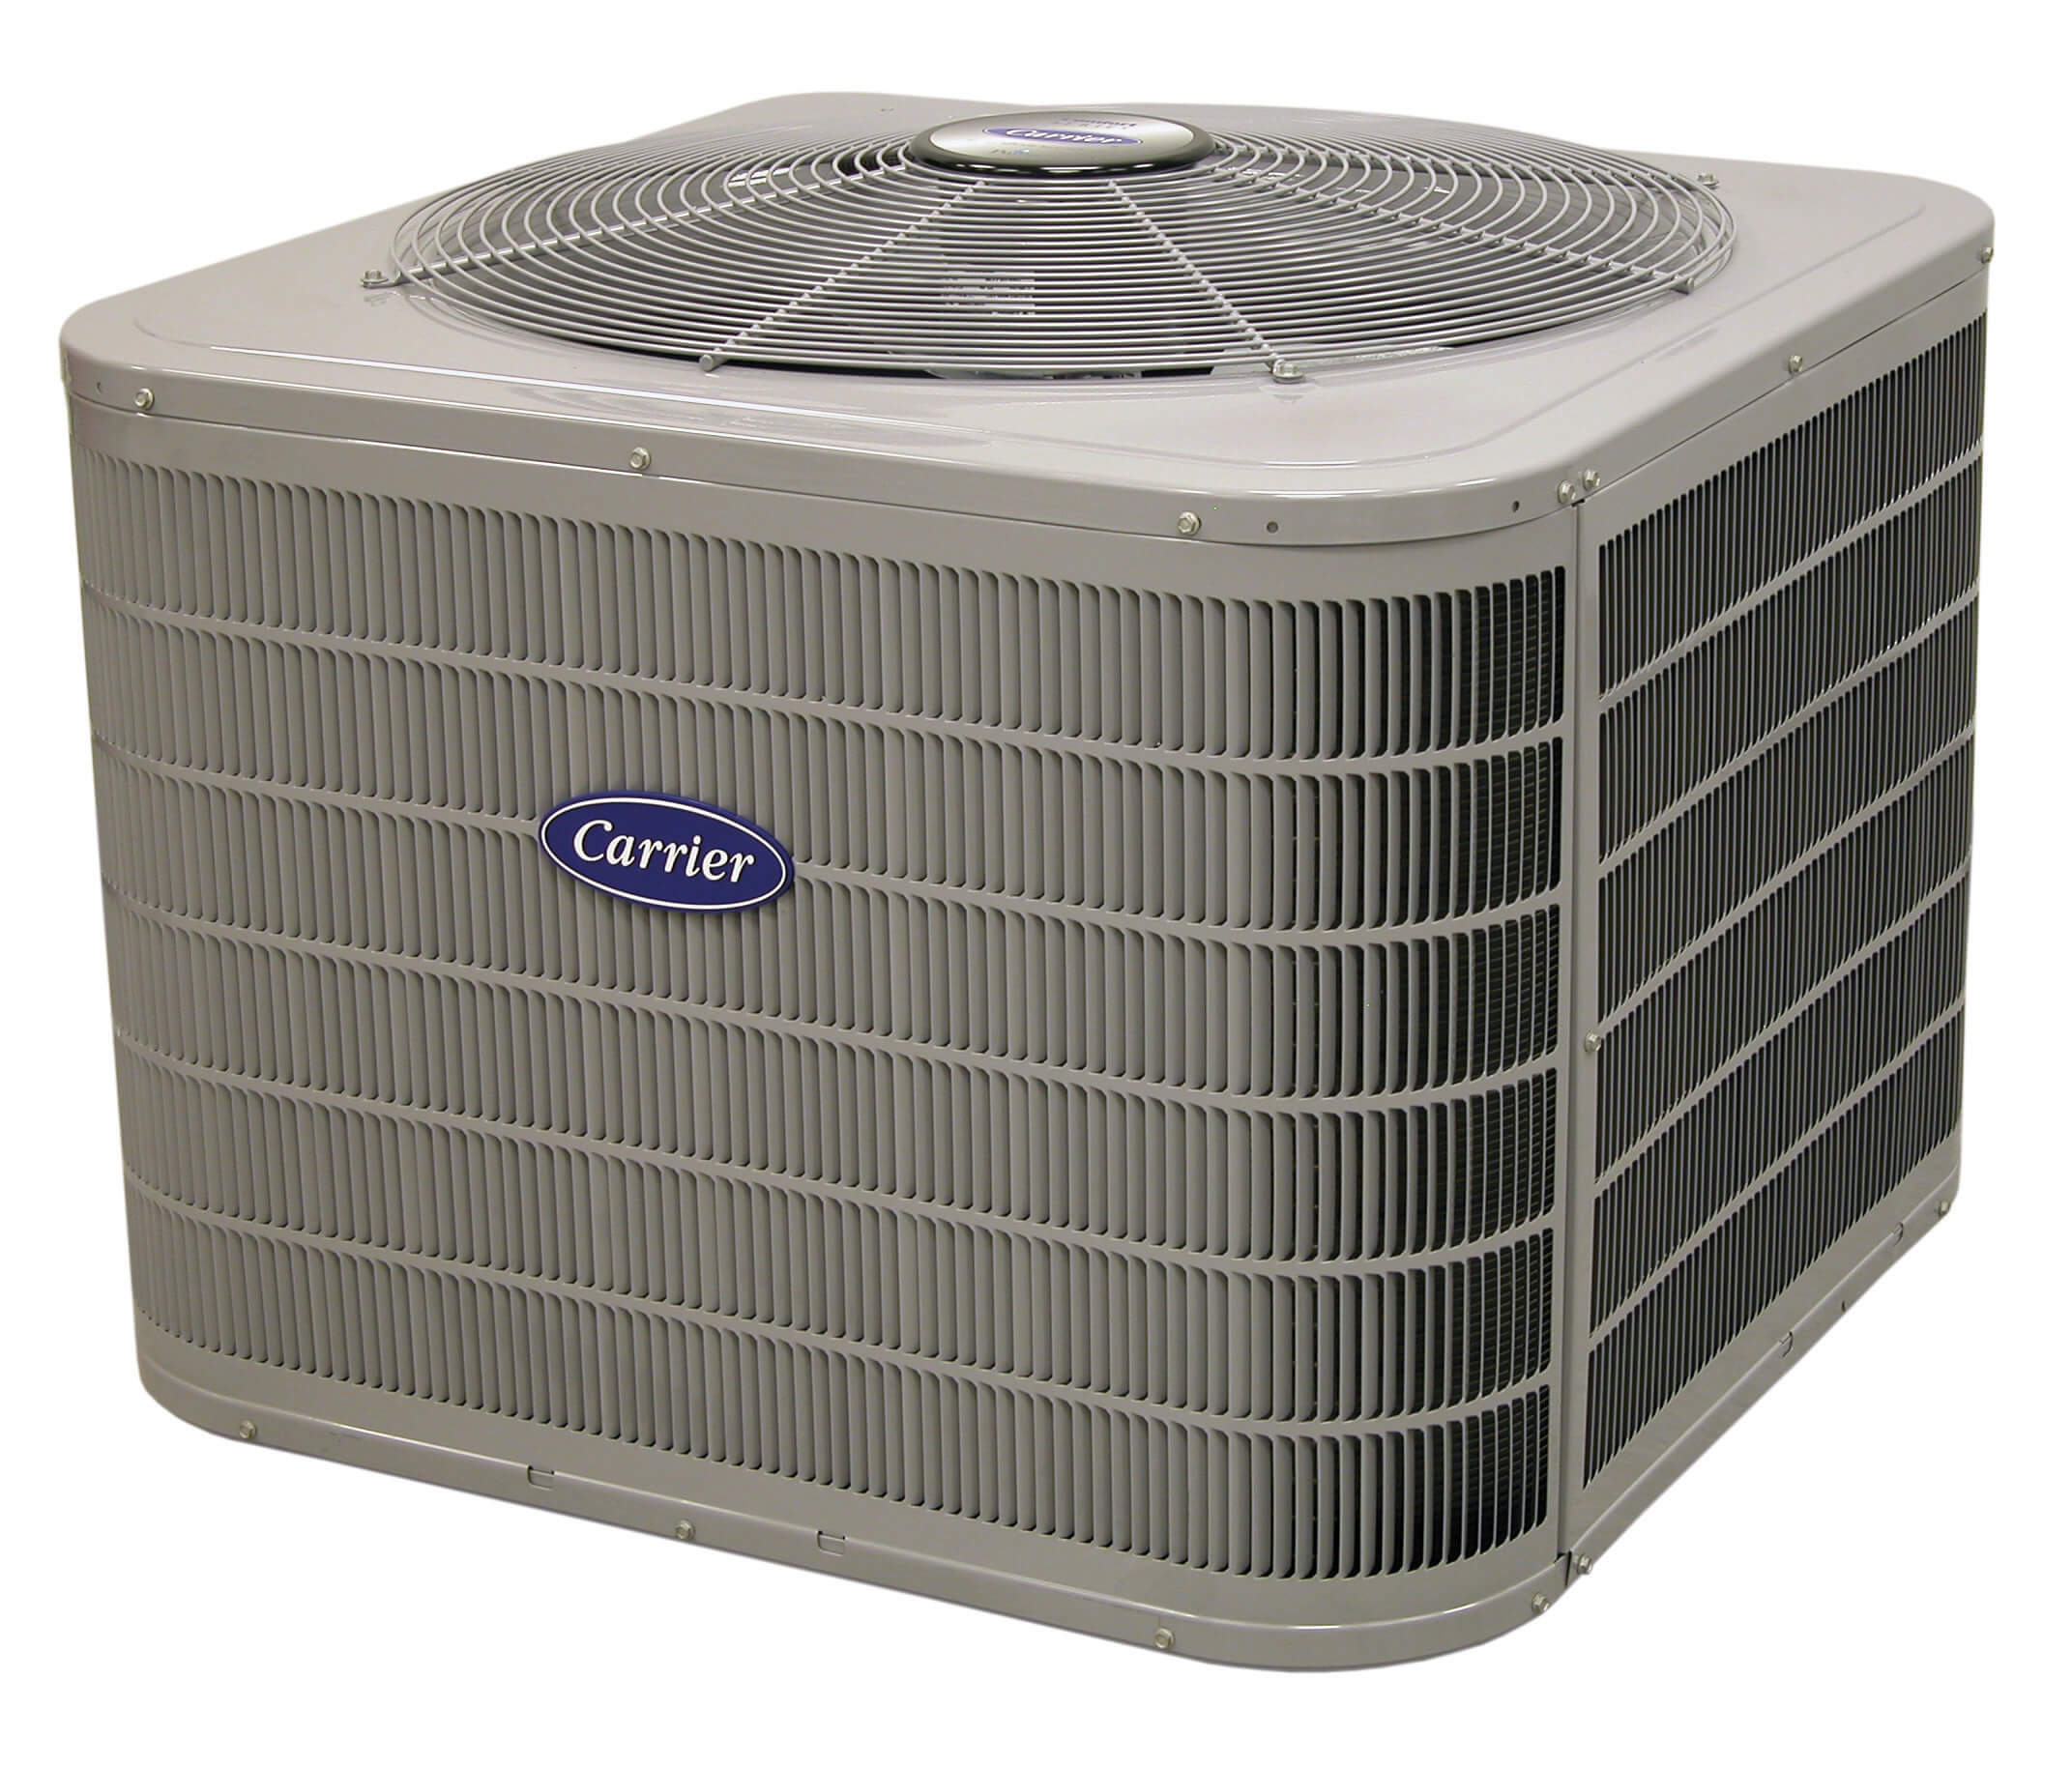 Carrier air conditioning unit from Degree Heating and Cooling